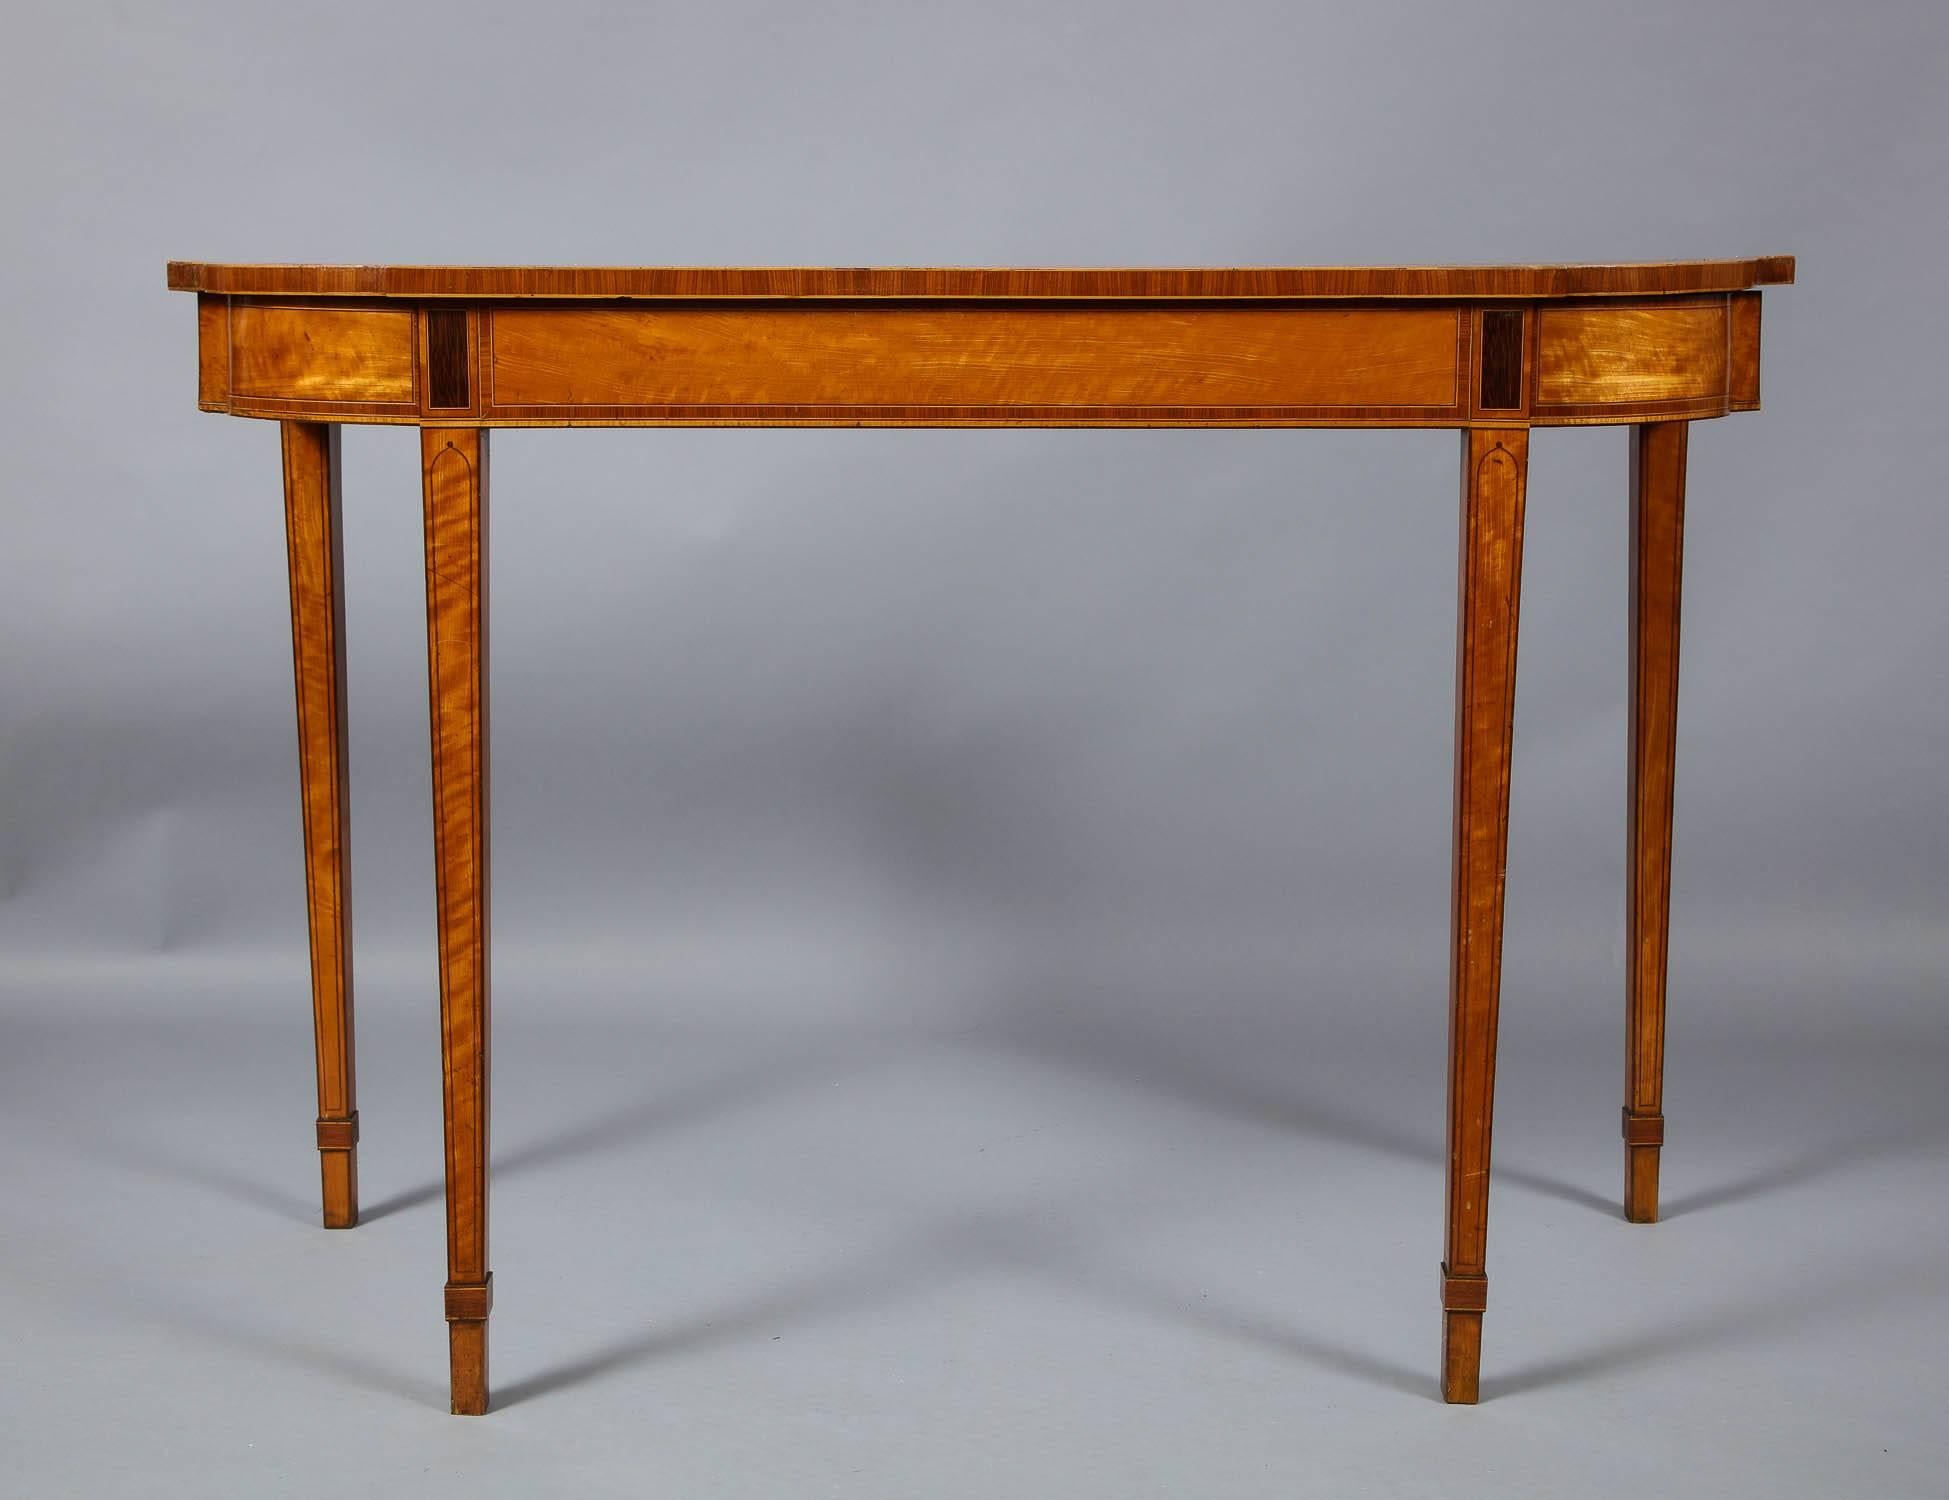 Very fine George III pier table, the top in beautifully figured satinwood with three kingwood crossbanded borders having boxwood stringing, and having a rose and honeysuckle painted bands, the apron also banded in kingwood, the legs capped with